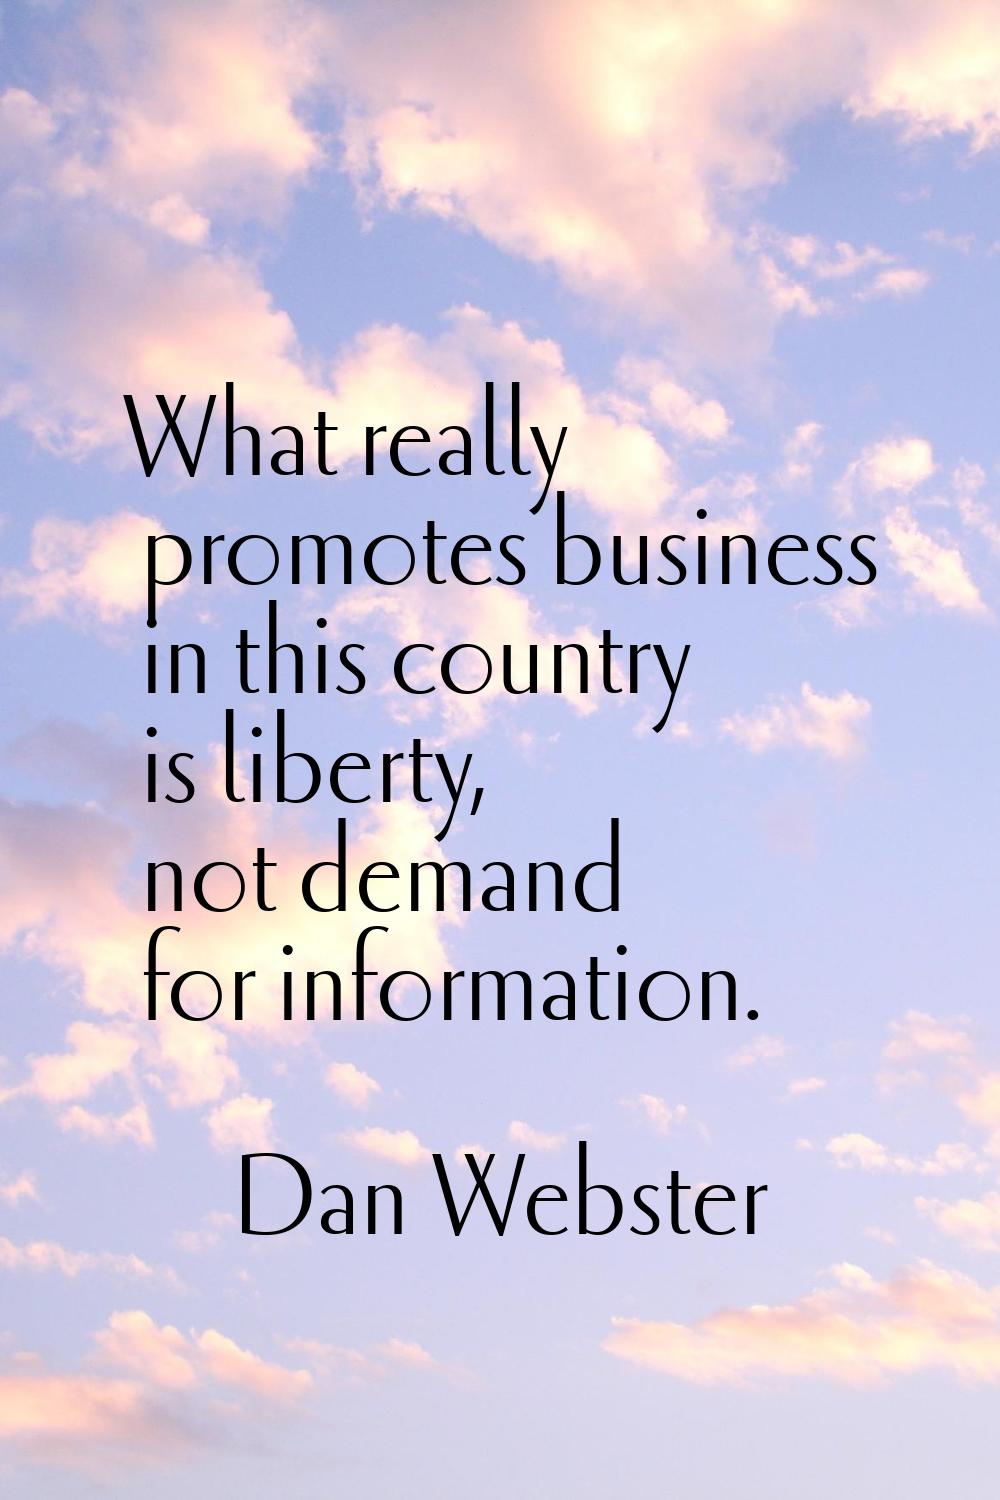 What really promotes business in this country is liberty, not demand for information.